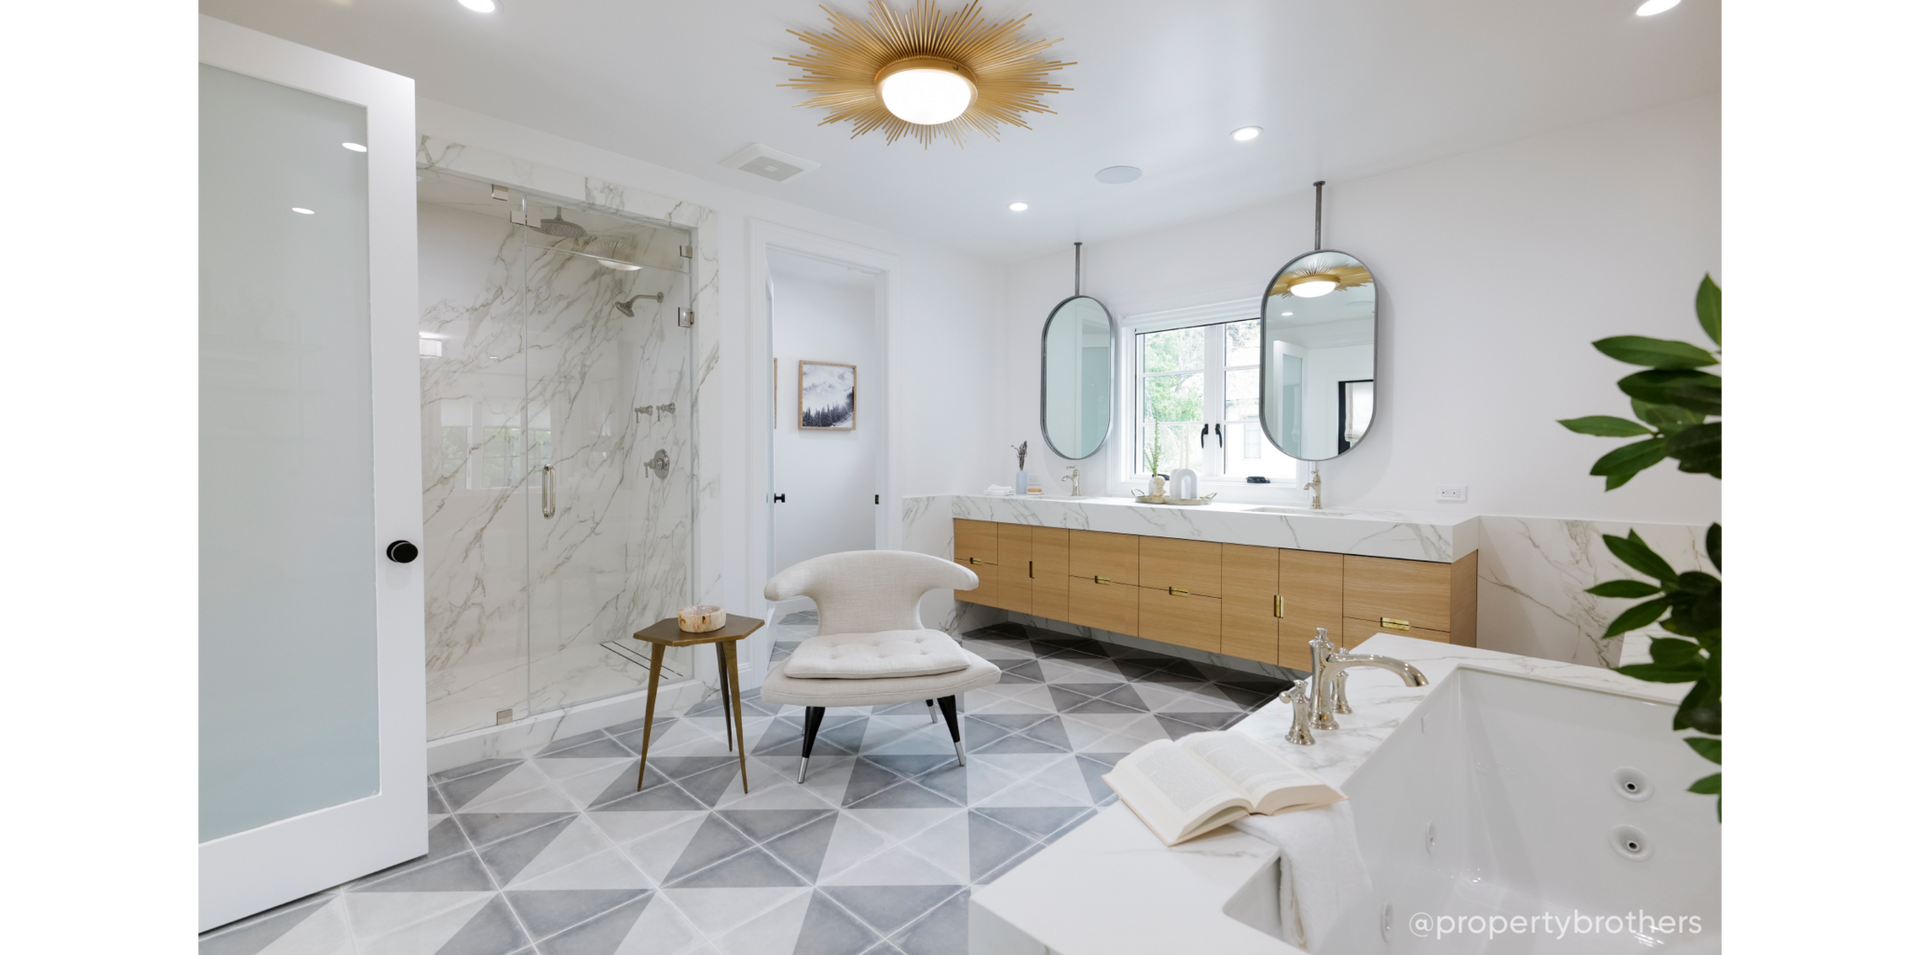 Bathroom designed by the Property Brothers with the Sitka Drop-In Tub, Beasley Bathroom Faucet & Tub Faucet in Polished Nickel